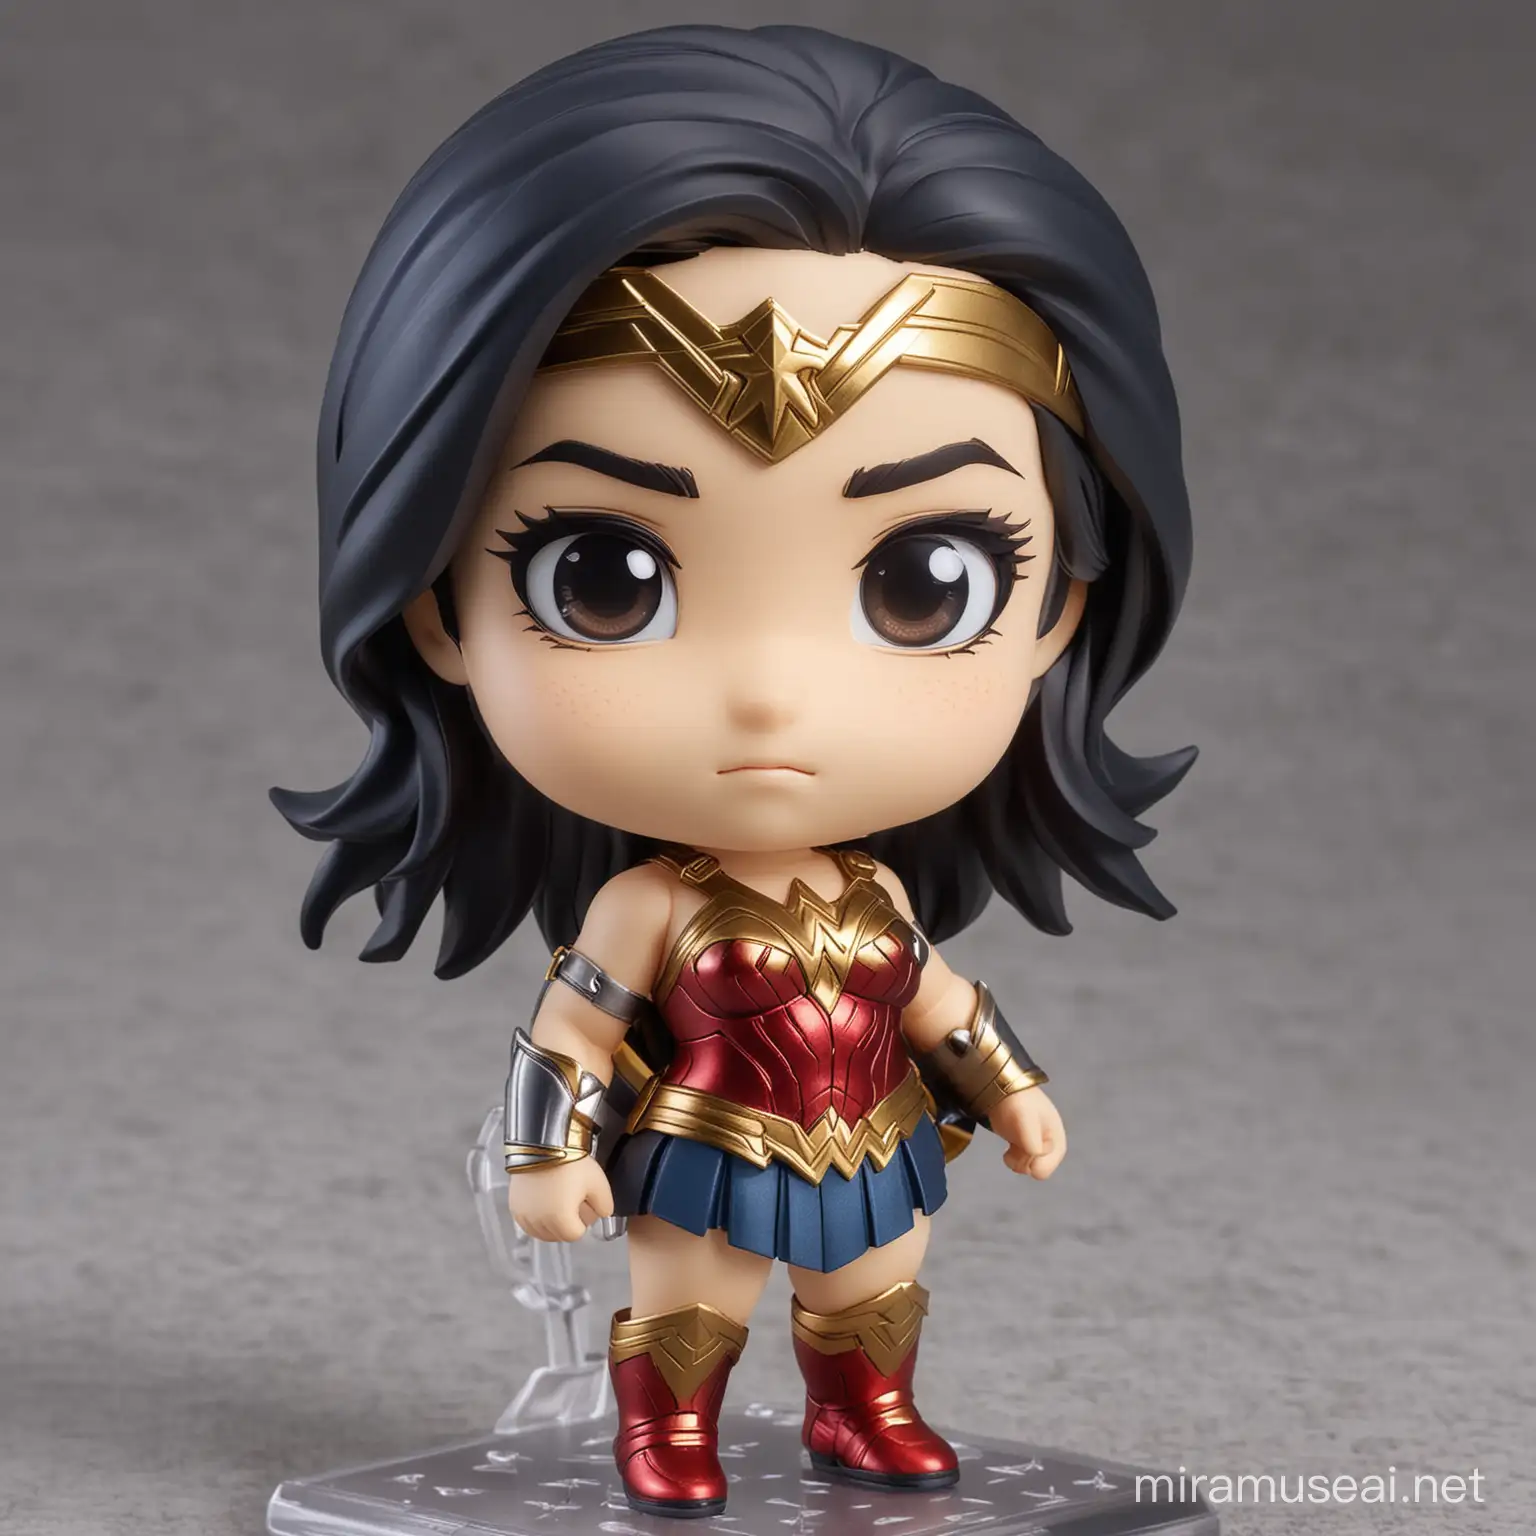 Chibi Wonder Woman Character Design without Defects